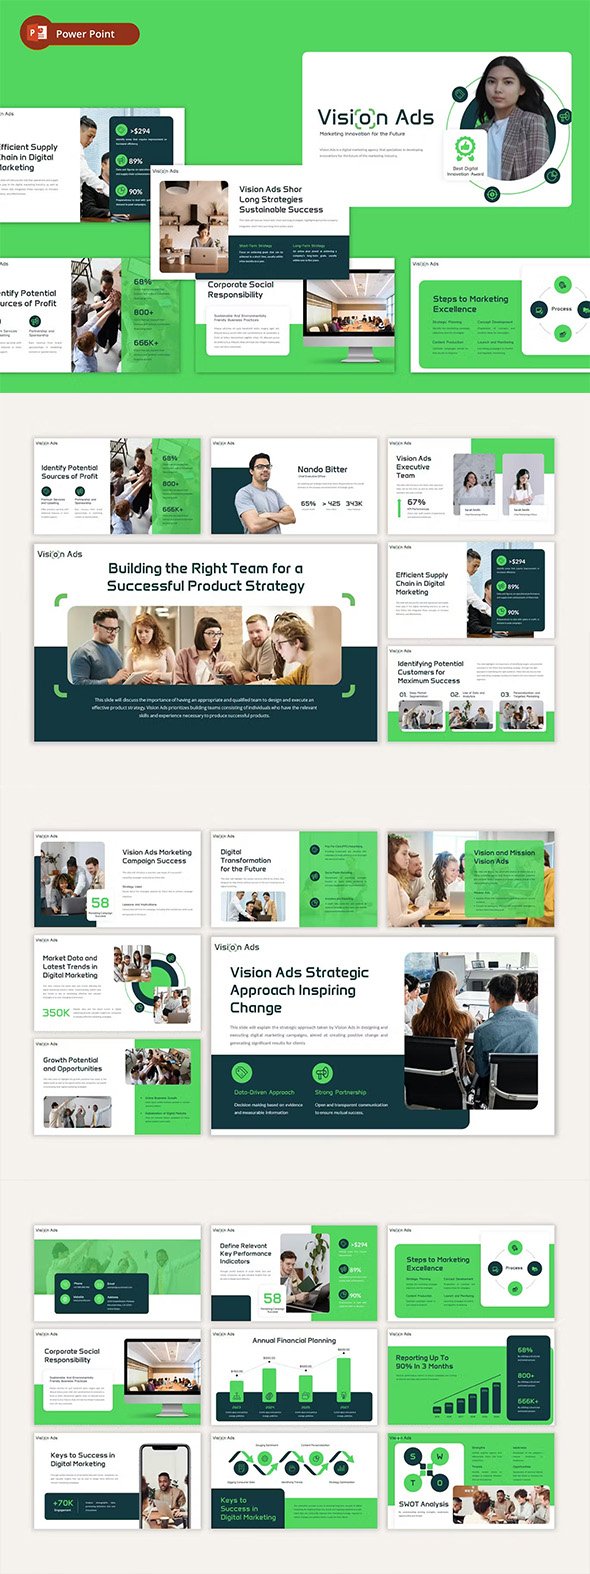 Vision Ads - Digital Marketing PowerPoint Template